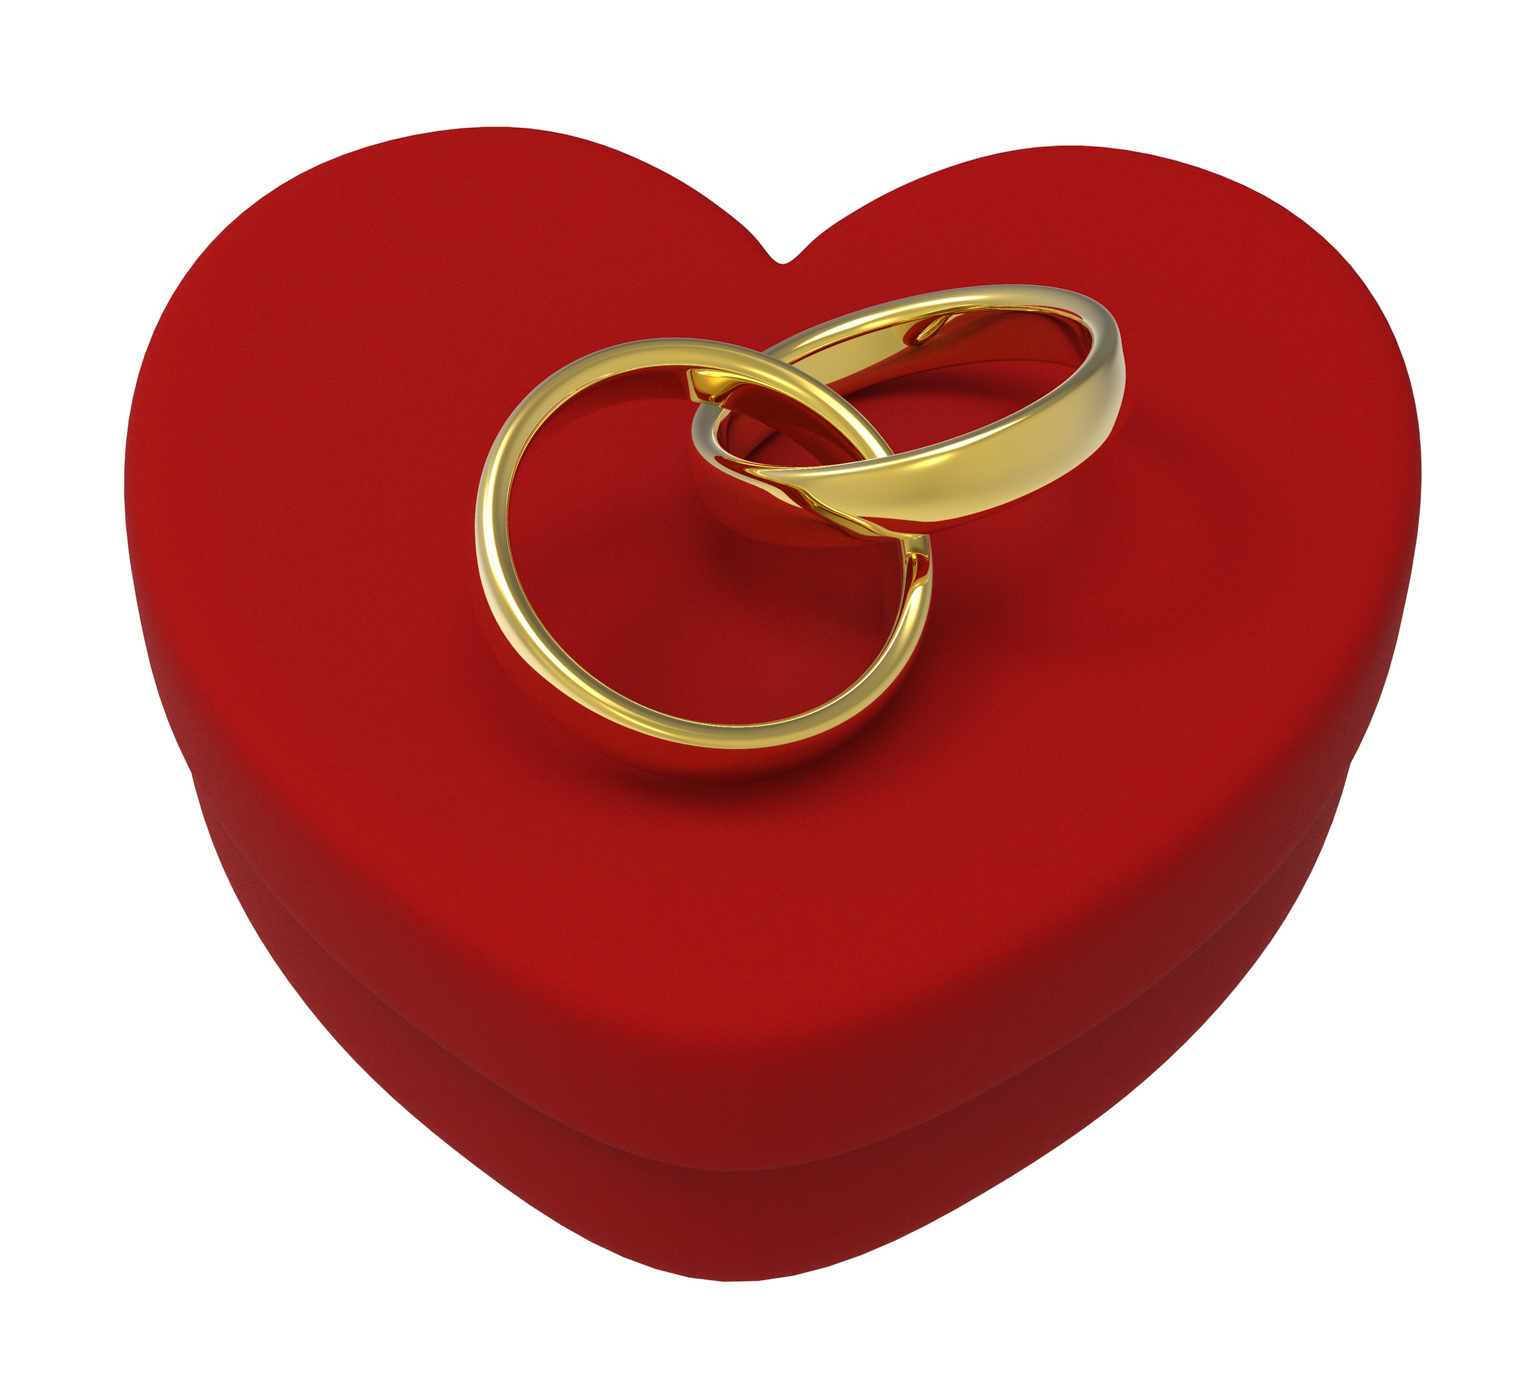 Wedding rings on heart box show engagement and marriage photo